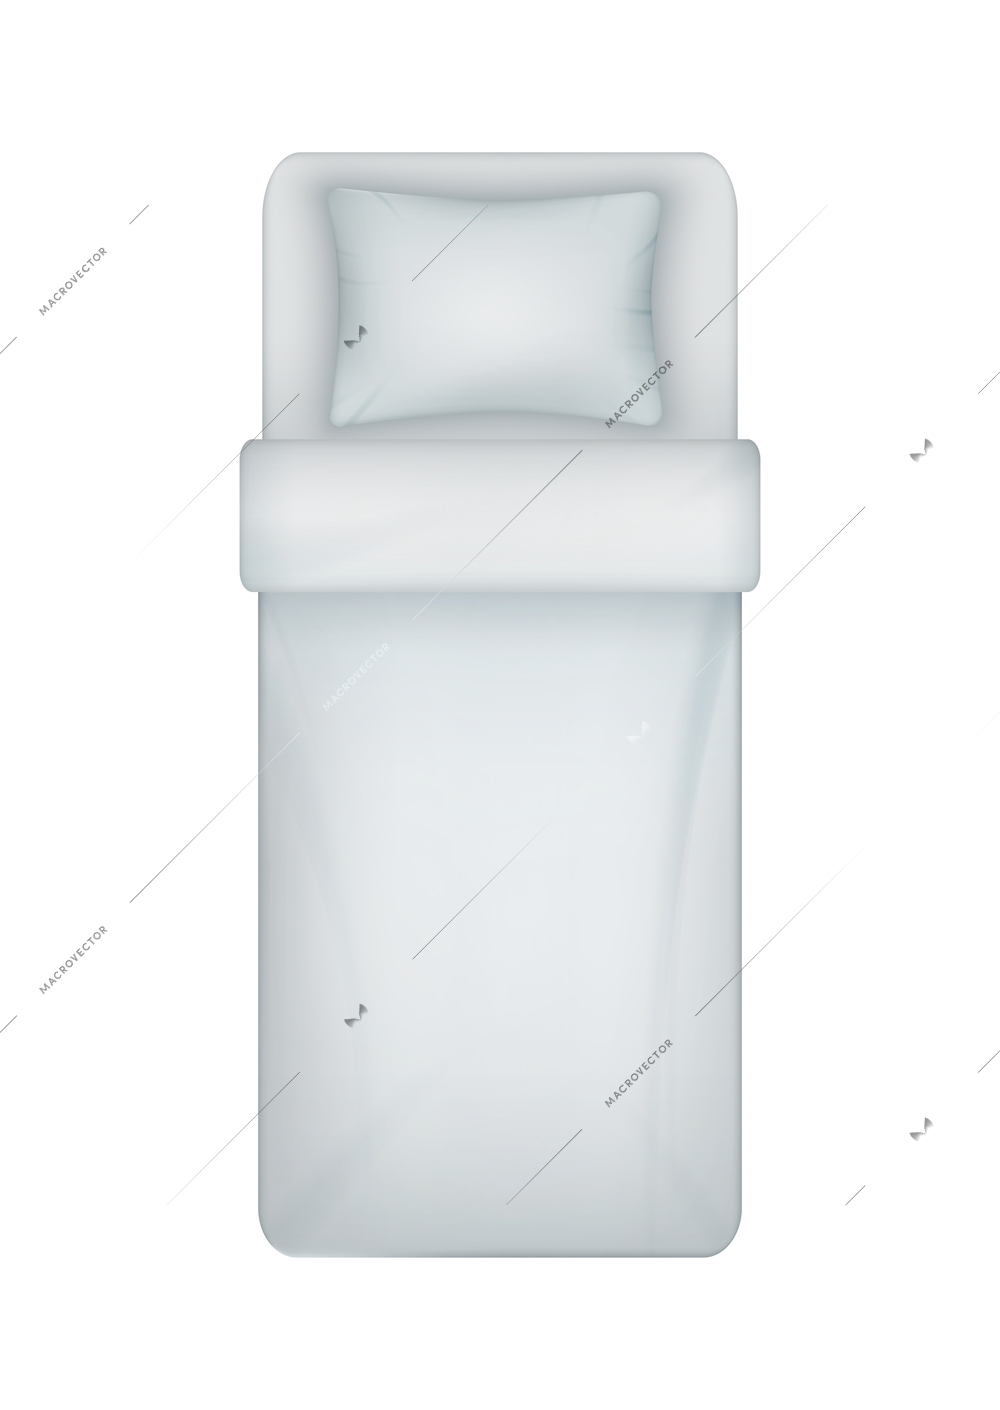 Top view mockup of white blank bedding set for single bed realistic isolated vector illustration